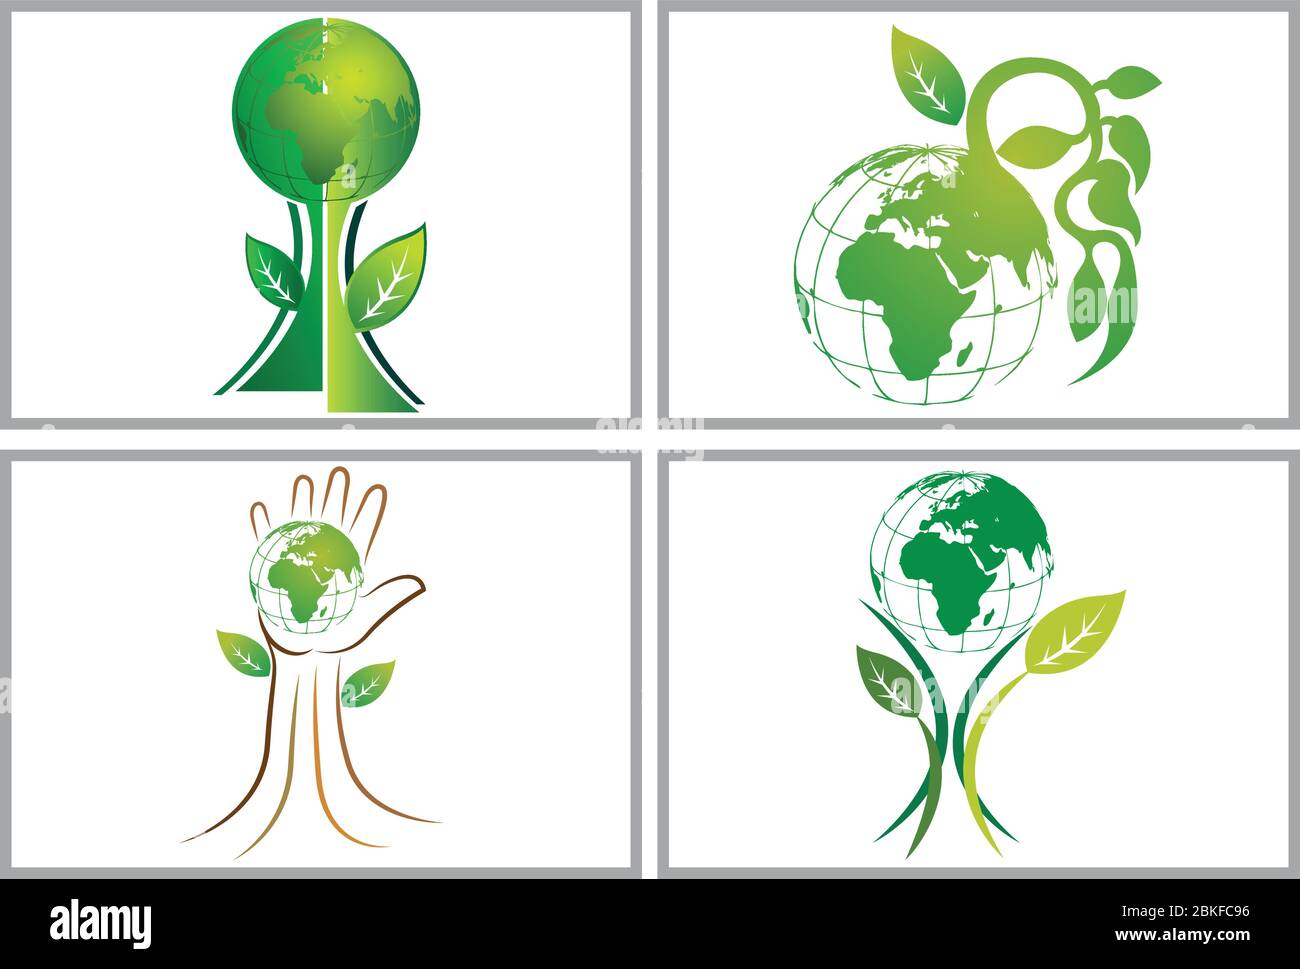 Illustration art of a globe tree set collection logos with background Stock Vector